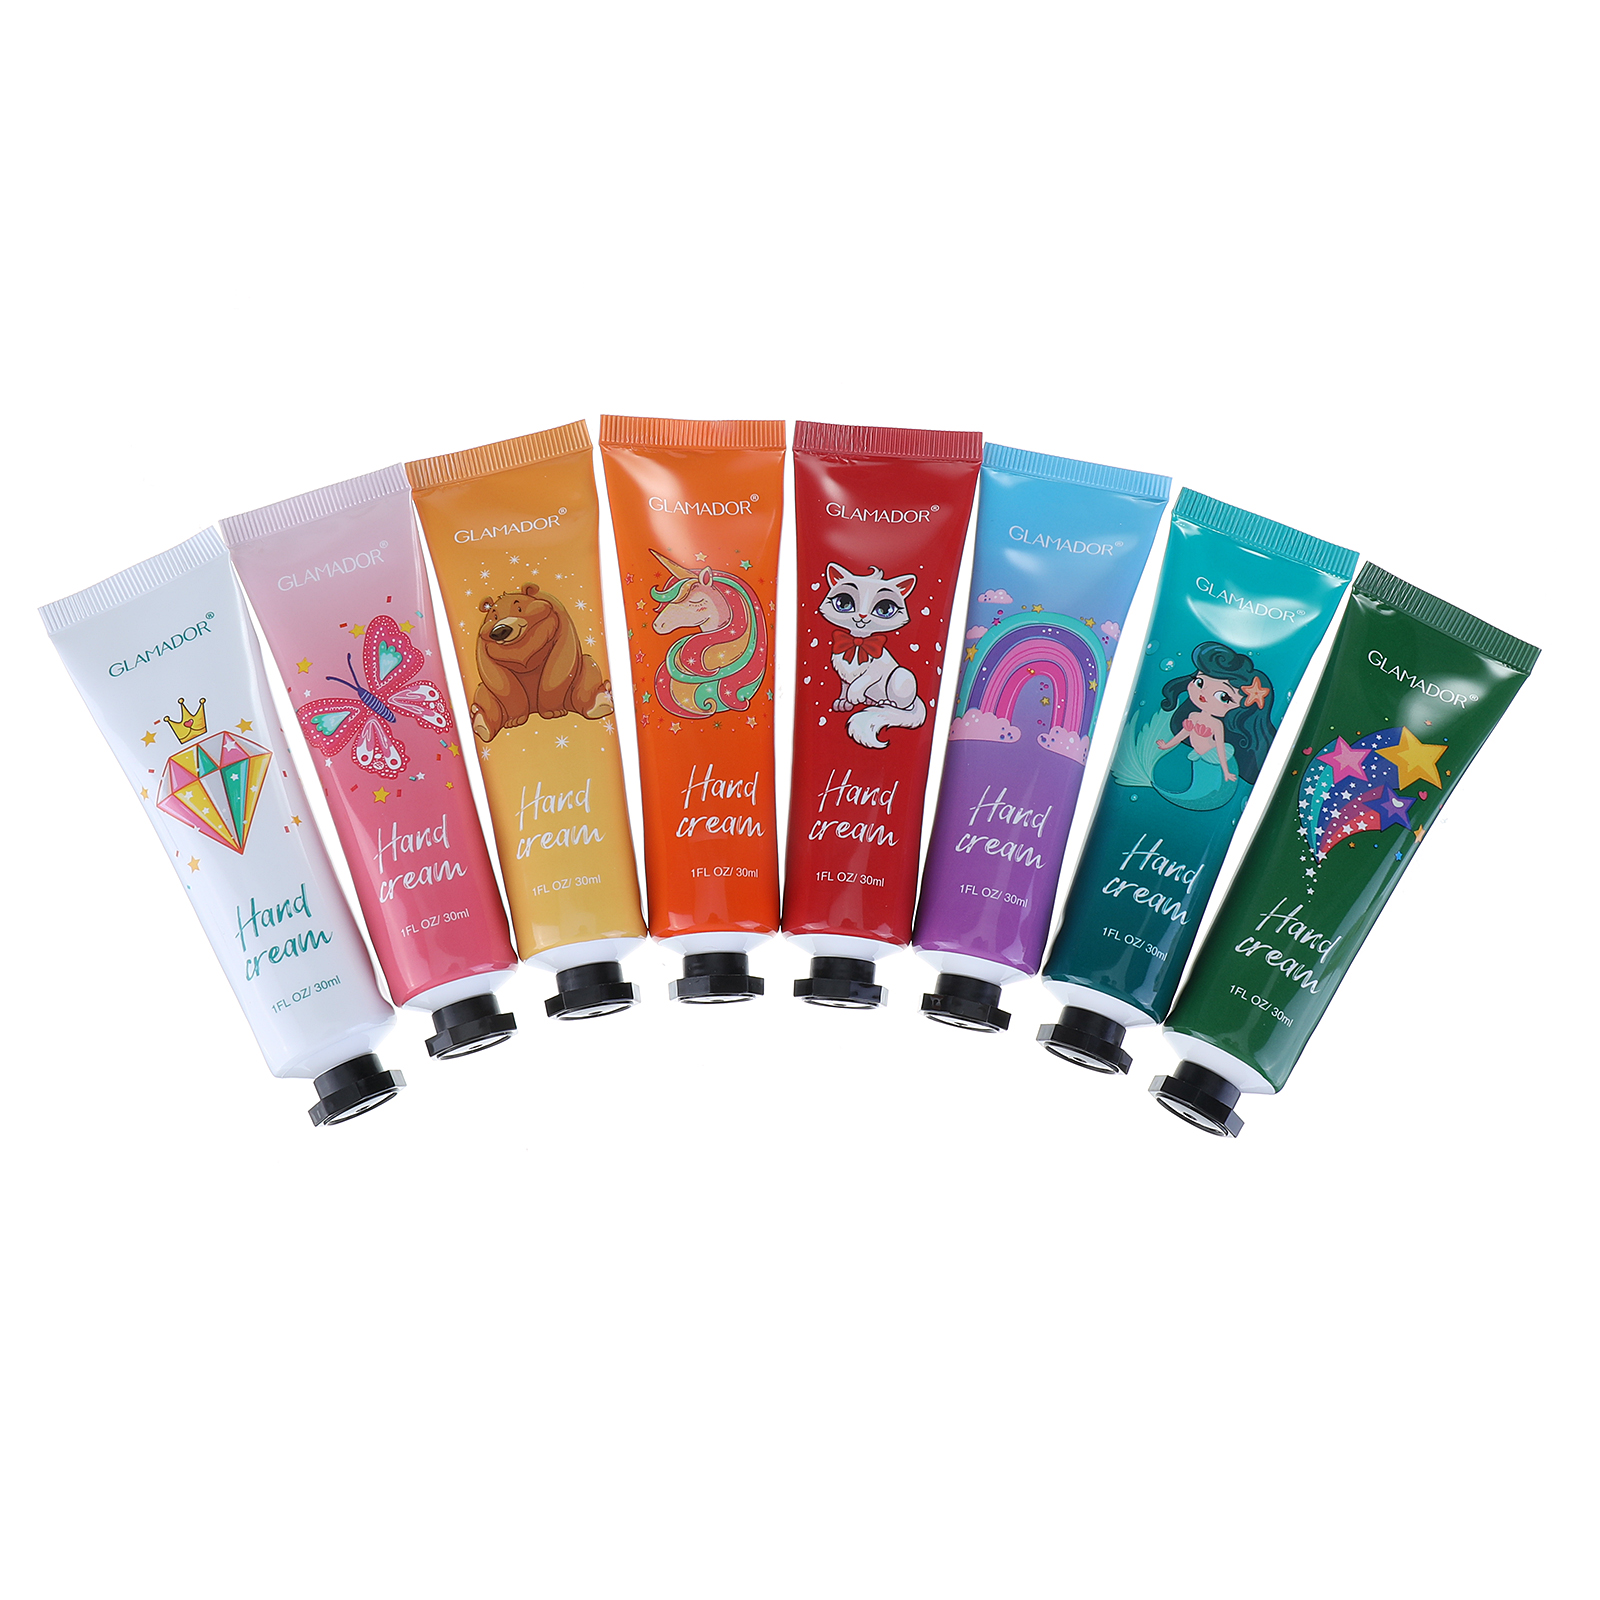 GLAMADOR-Hand-Cream-Gift-Set-9-Pcs-Travel-Size-Hand-Lotion-30ml-with-Lip-Balm-Hand-Cream-for-Dry-Cra-1940081-10